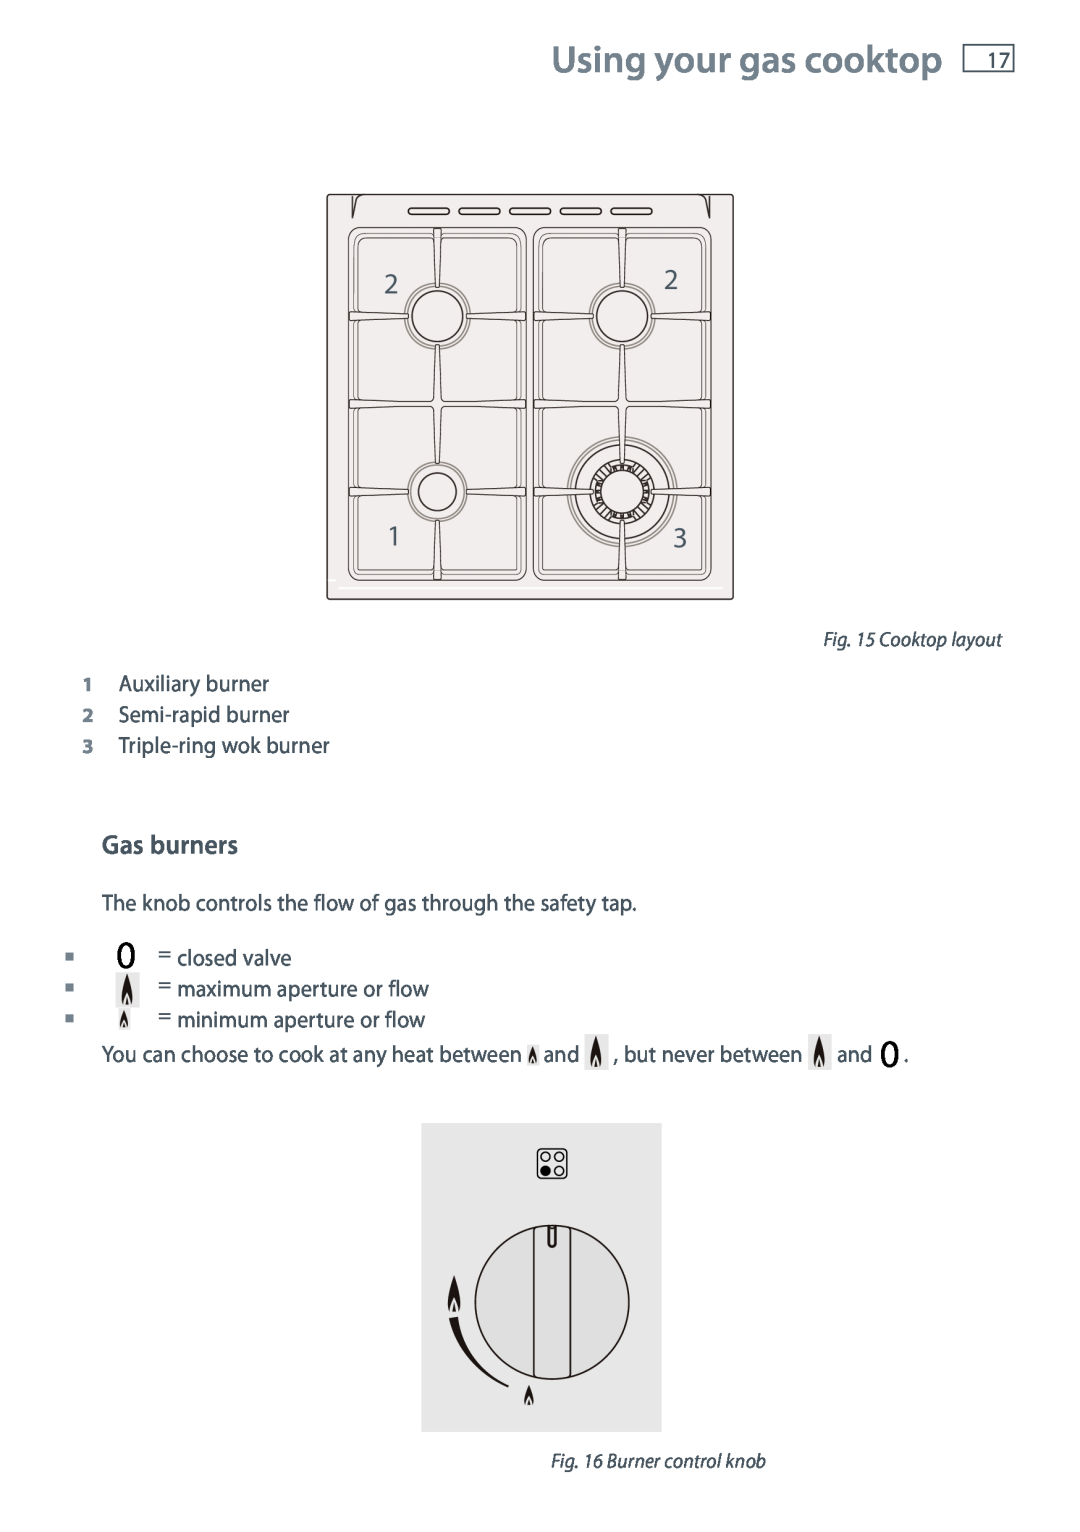 Fisher & Paykel 60 installation instructions Using your gas cooktop, Gas burners, Cooktop layout, Burner control knob 